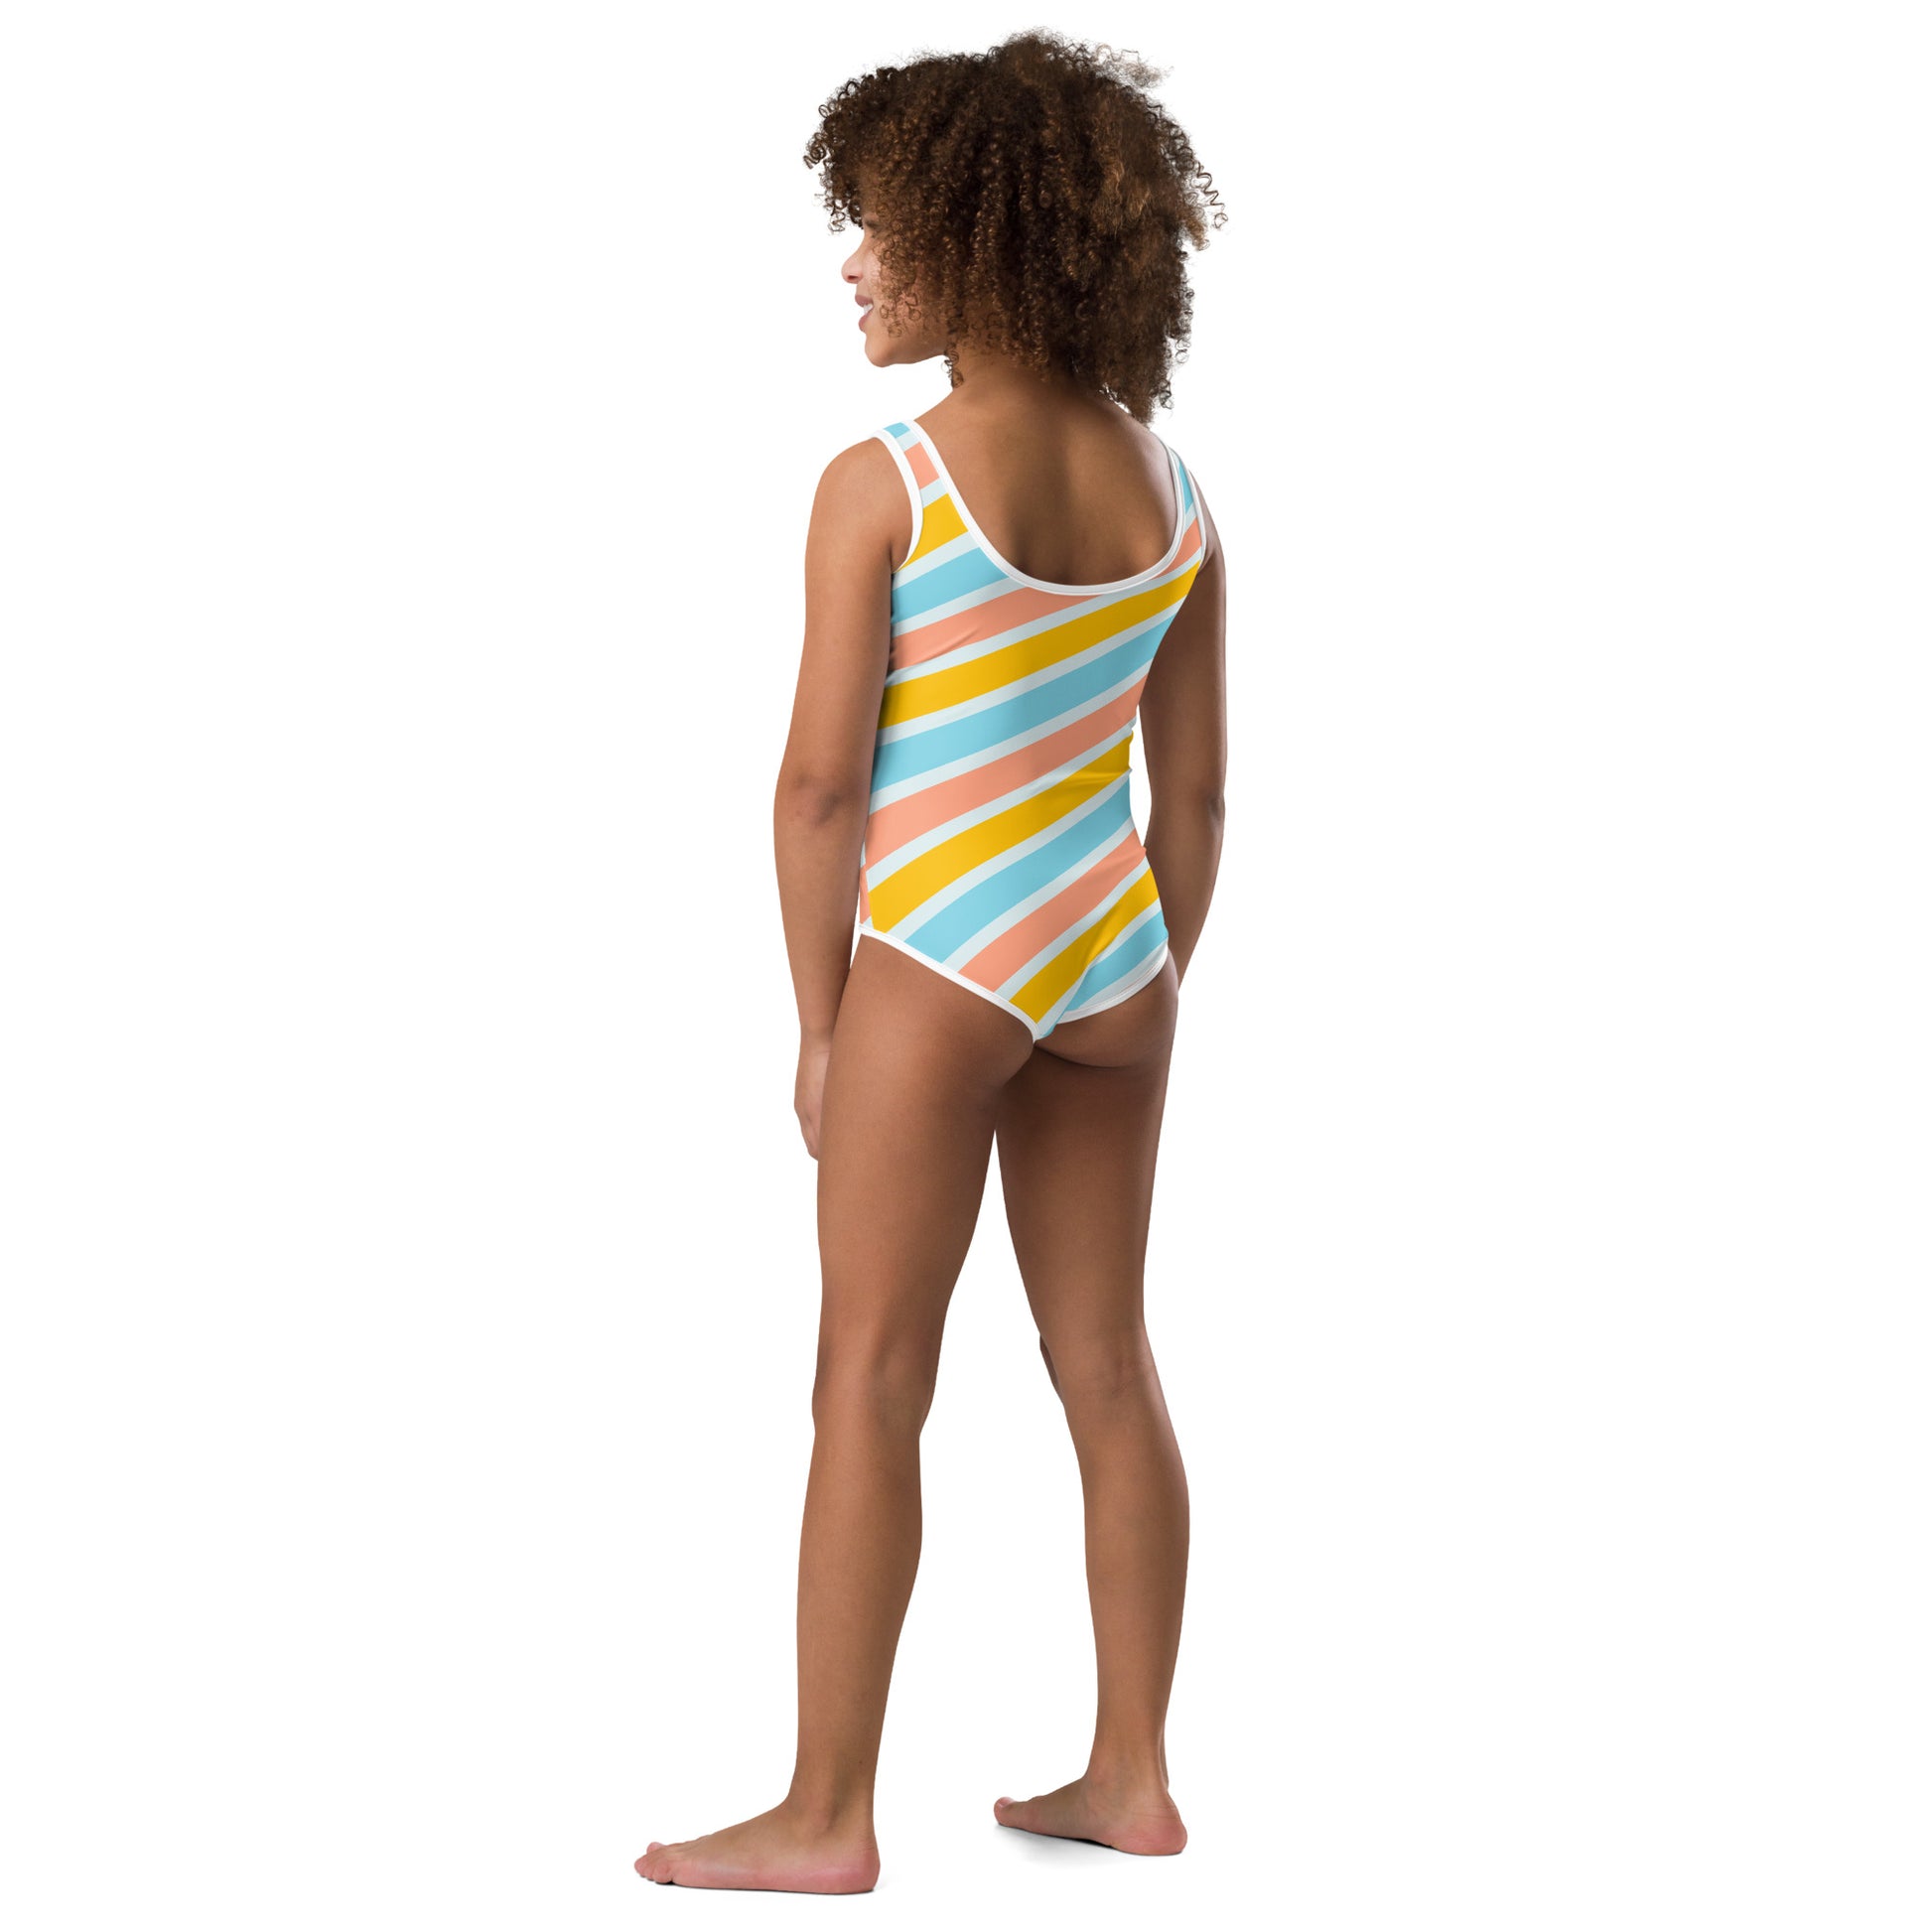 Kid with striped swimsuit in blue, orange and yellow